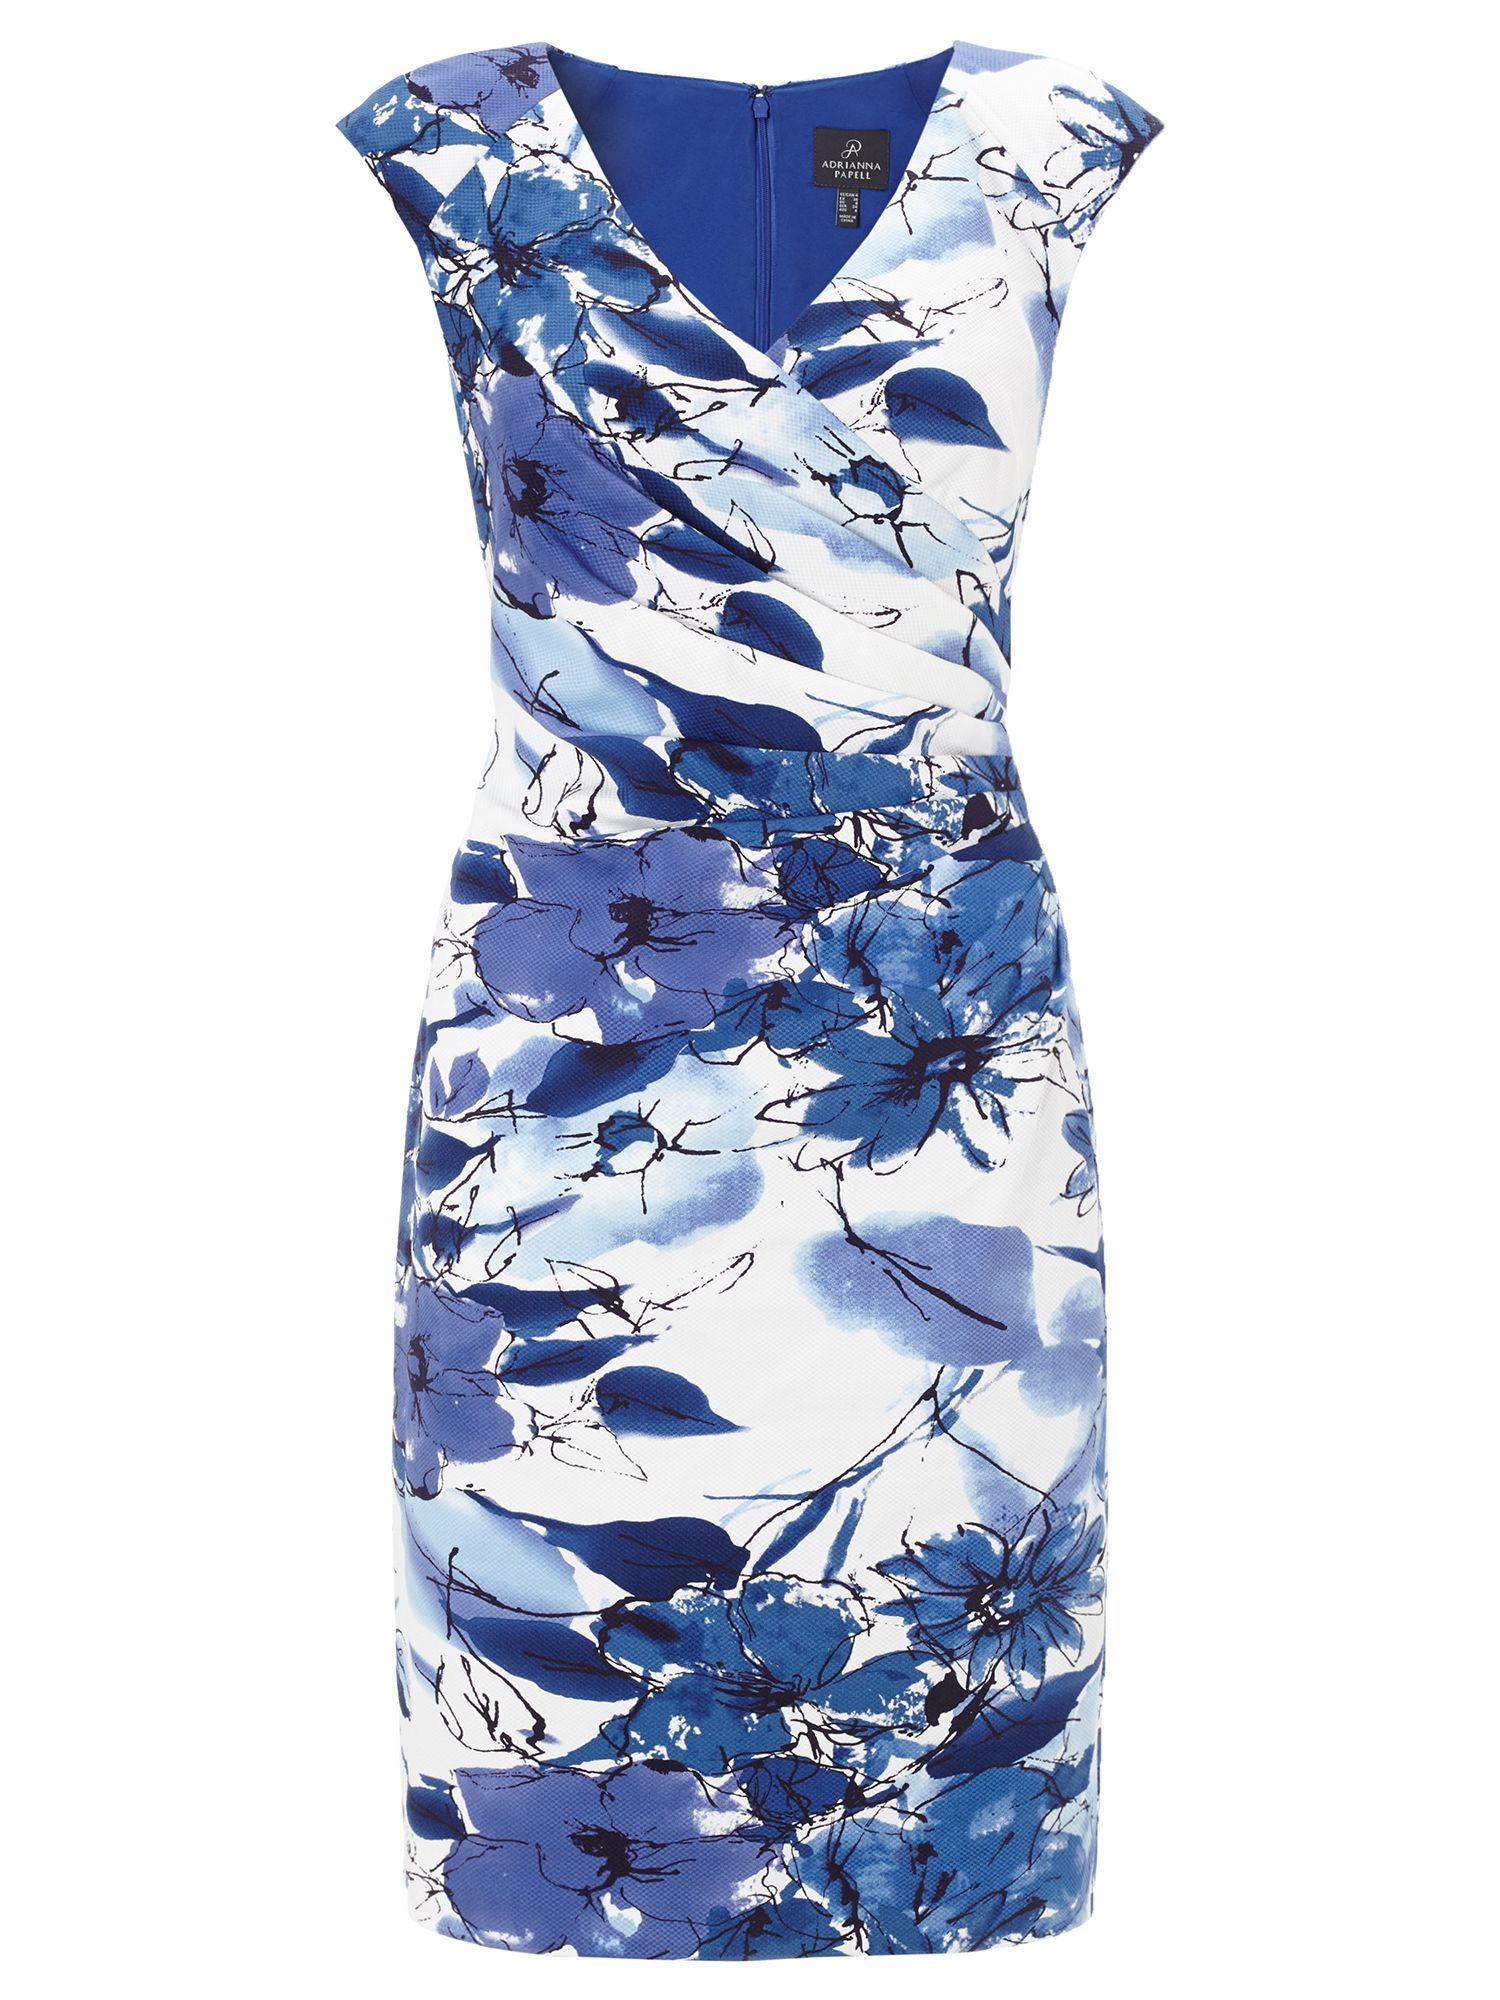 Adrianna papell Cap Sleeve Floral Print Sheath Dress in Blue | Lyst